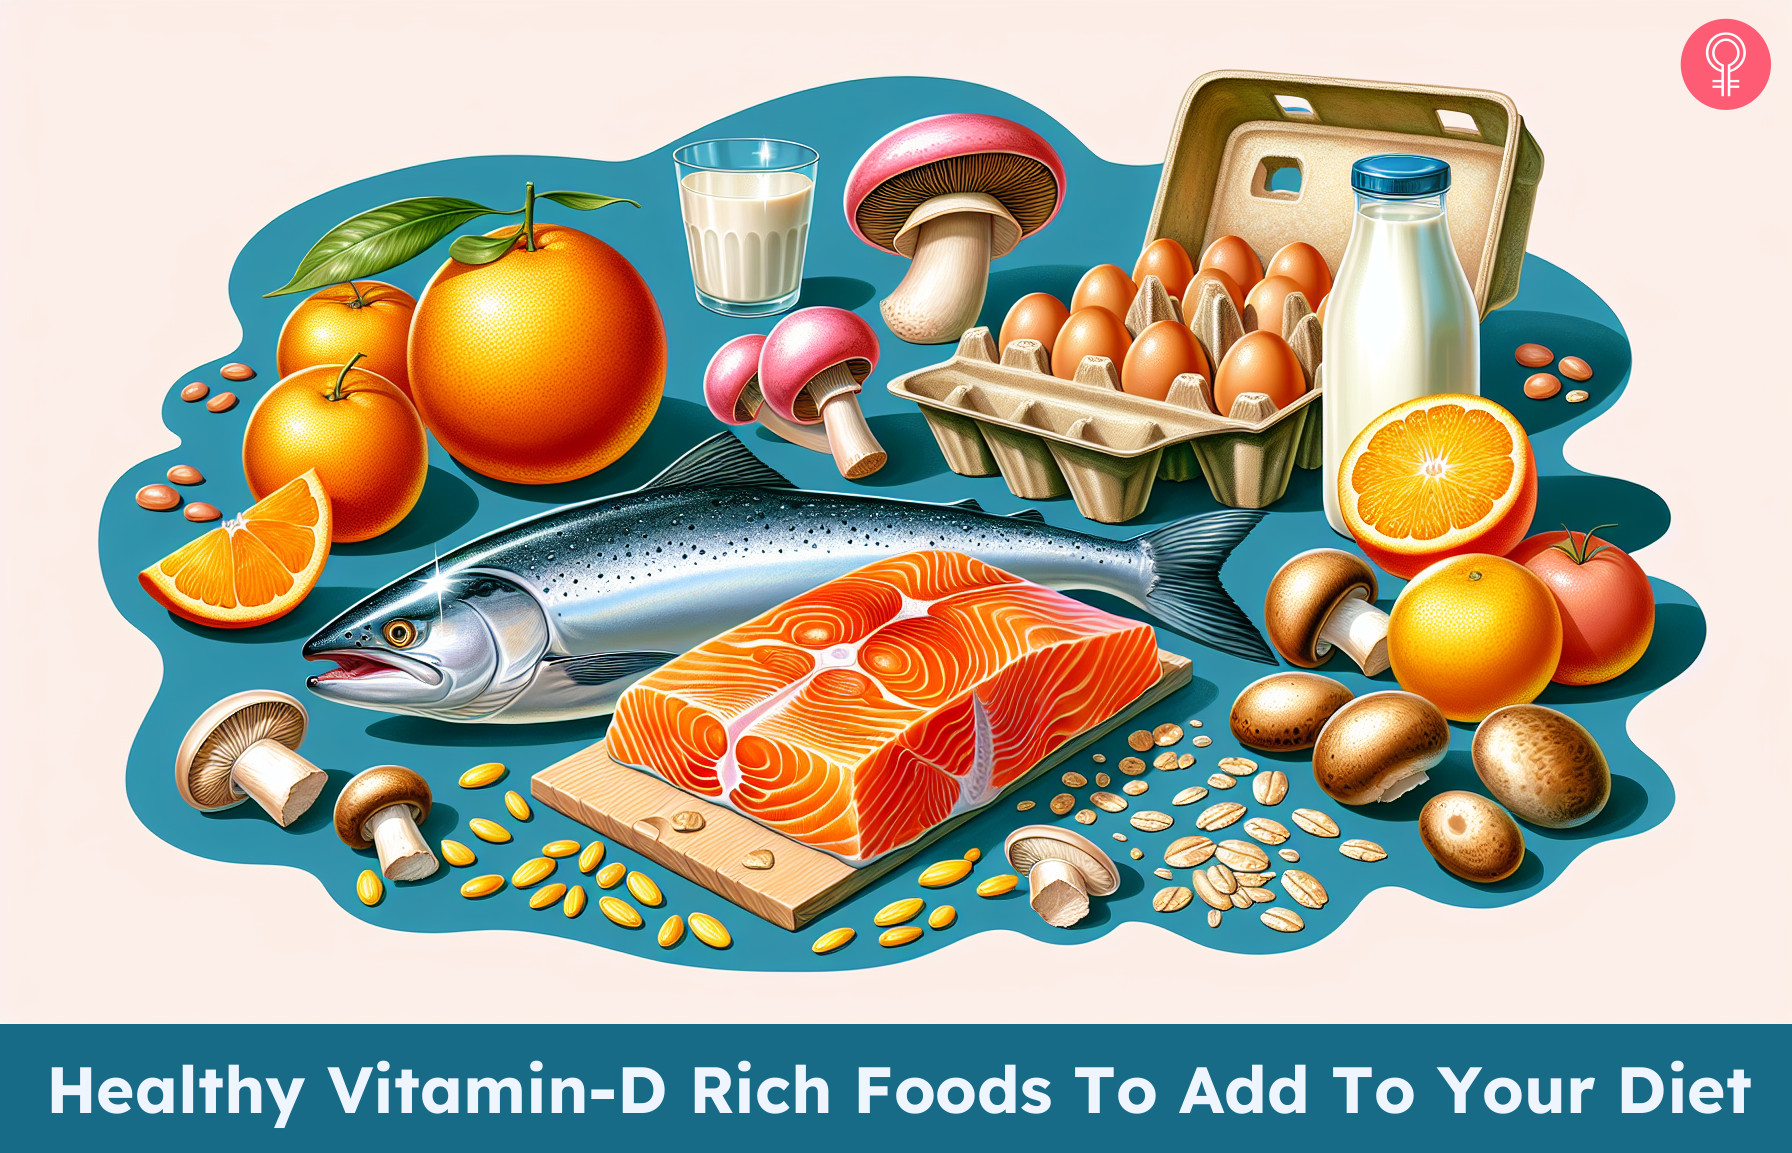 29 Healthy And Balanced Vitamin-D Rich Foods To Add To Your Diet